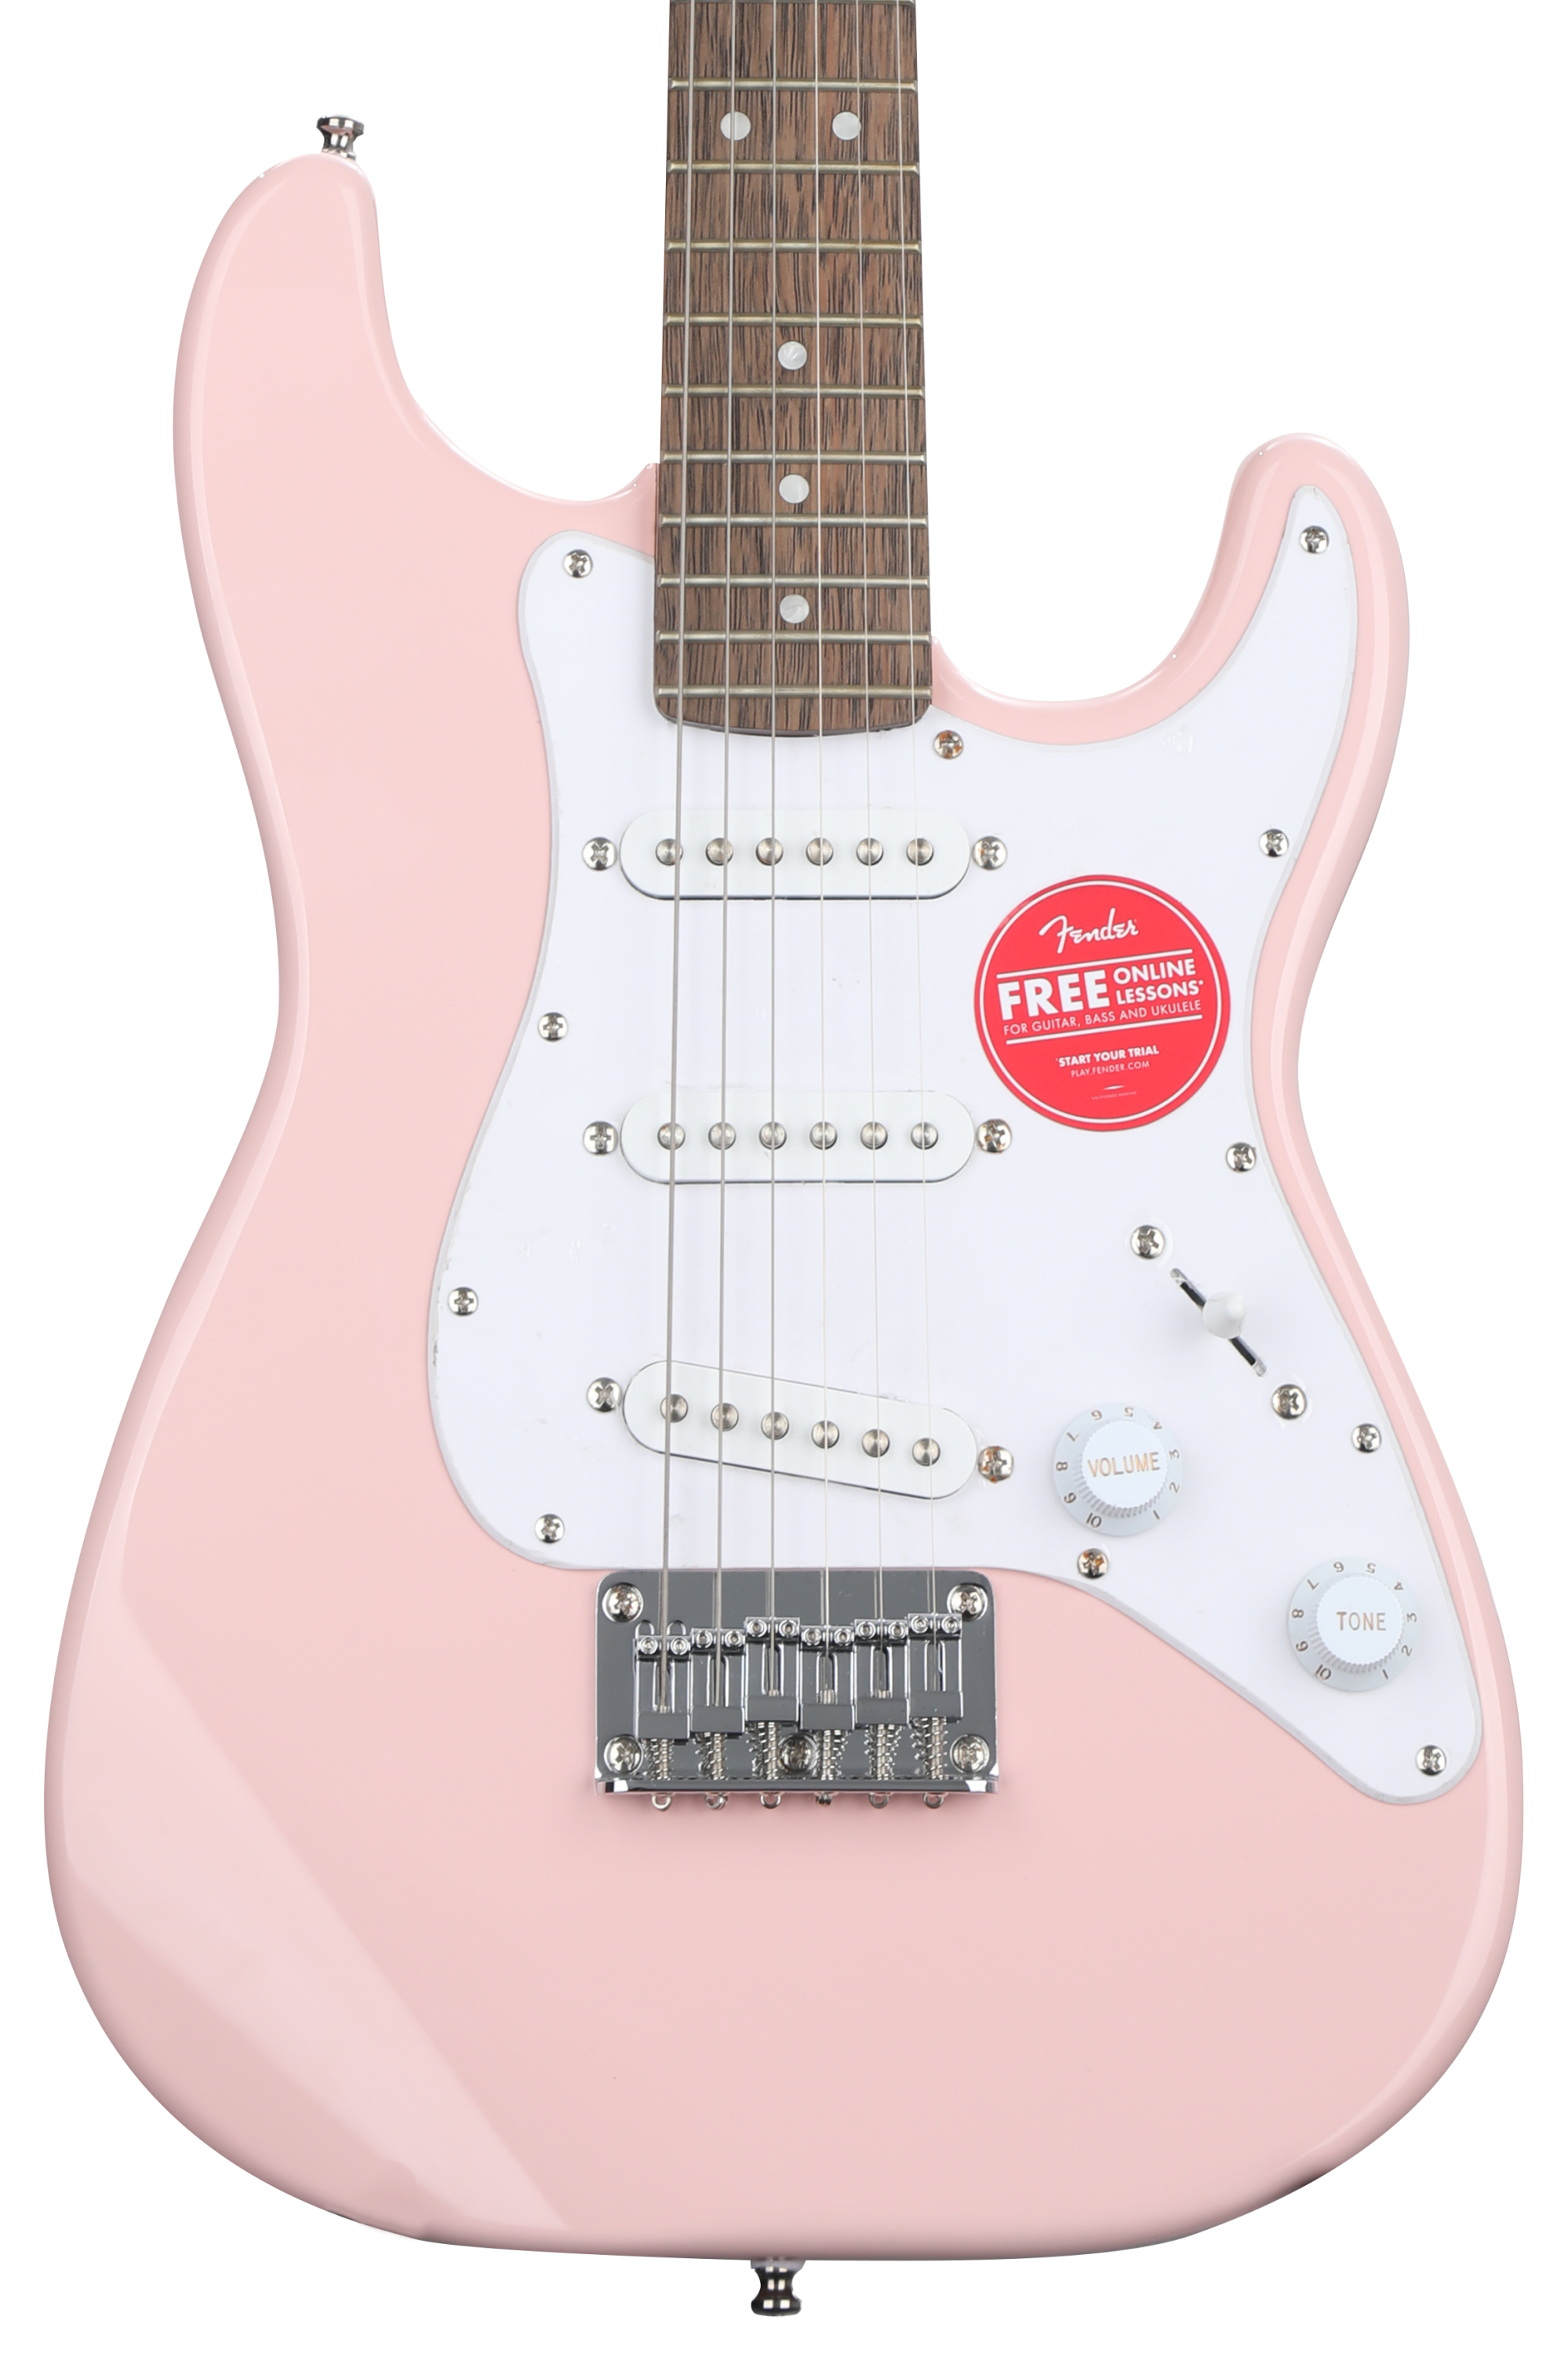 Bundled Item: Squier Mini Stratocaster Electric Guitar - Shell Pink with Laurel Fingerboard